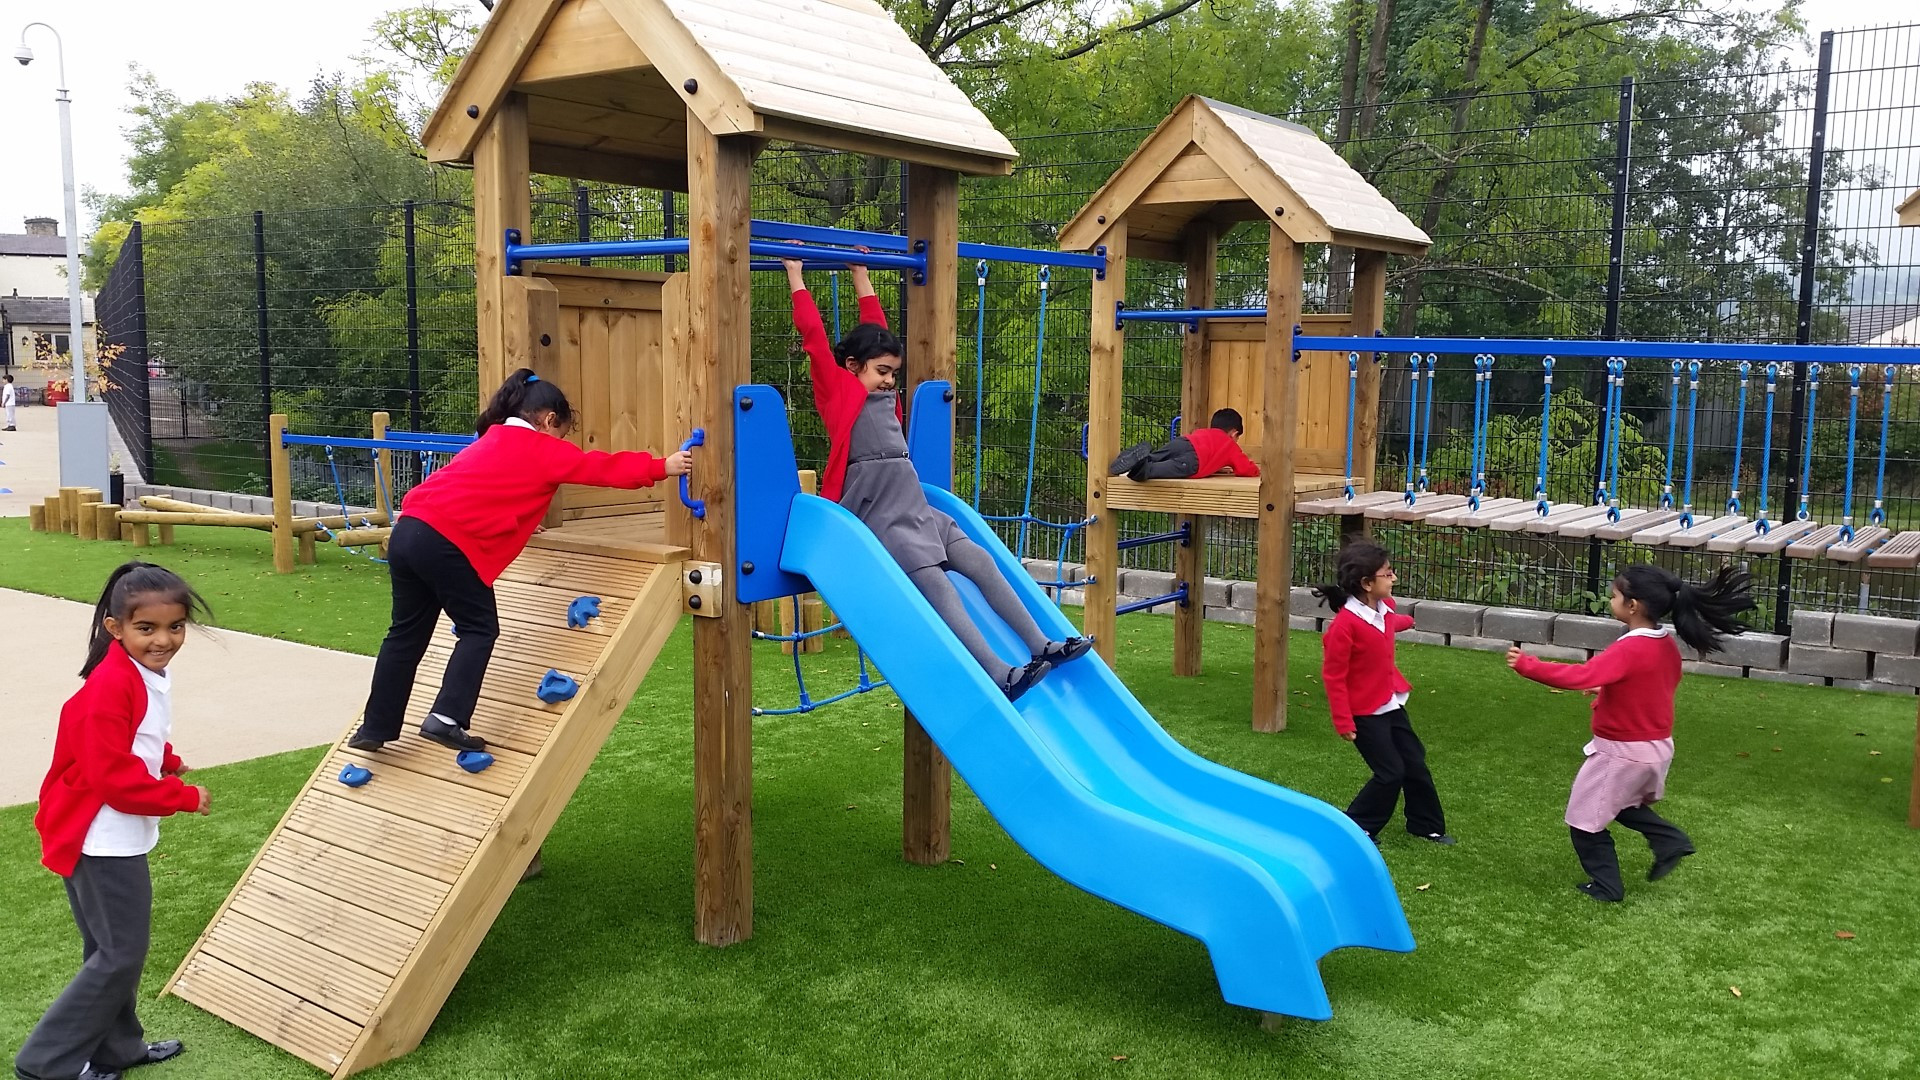 Kids Outdoors Playground
 How Outdoor Play Can Improve Children s Sleep